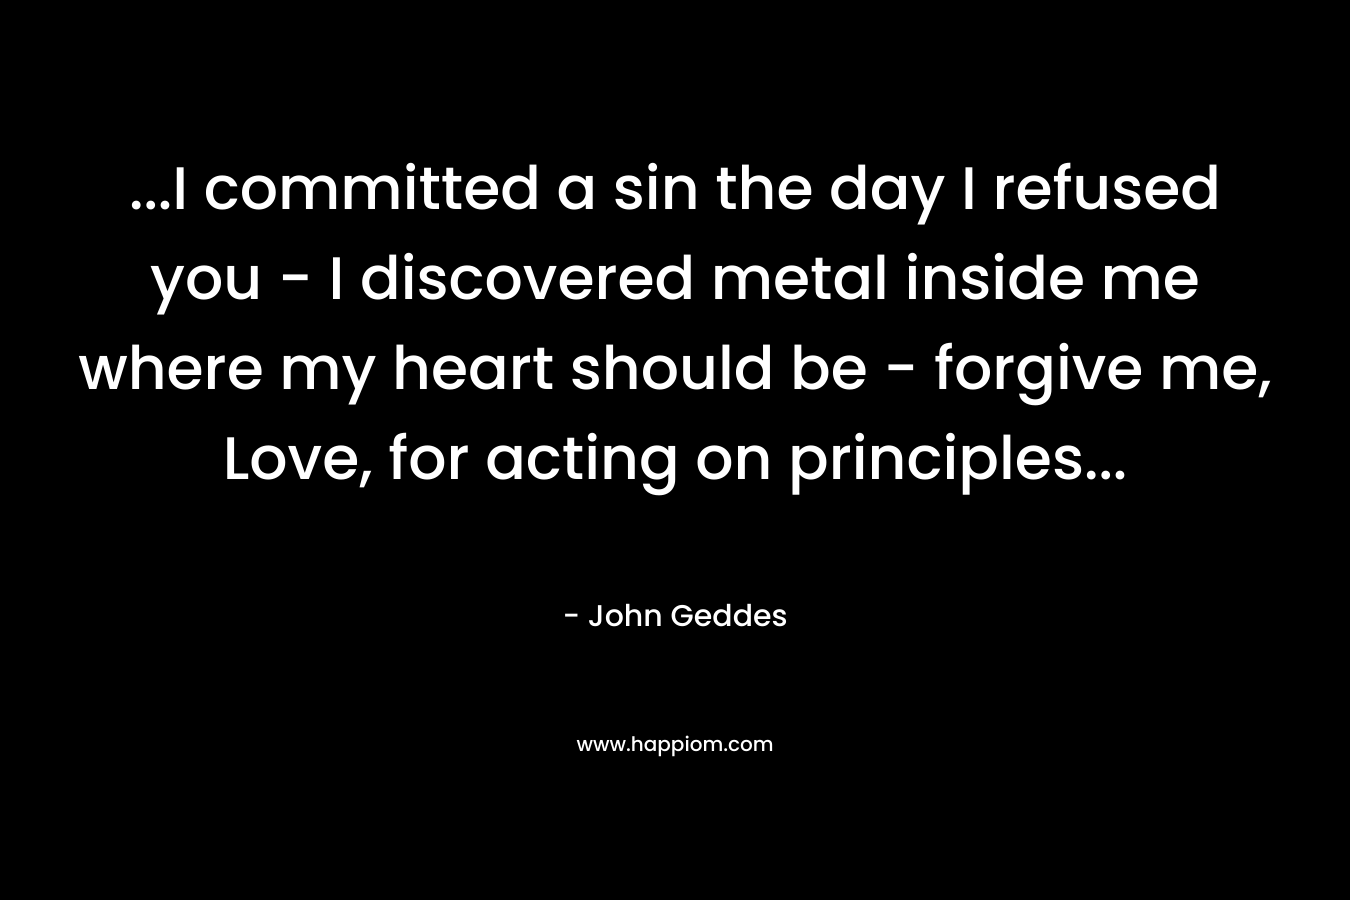 …I committed a sin the day I refused you – I discovered metal inside me where my heart should be – forgive me, Love, for acting on principles… – John Geddes